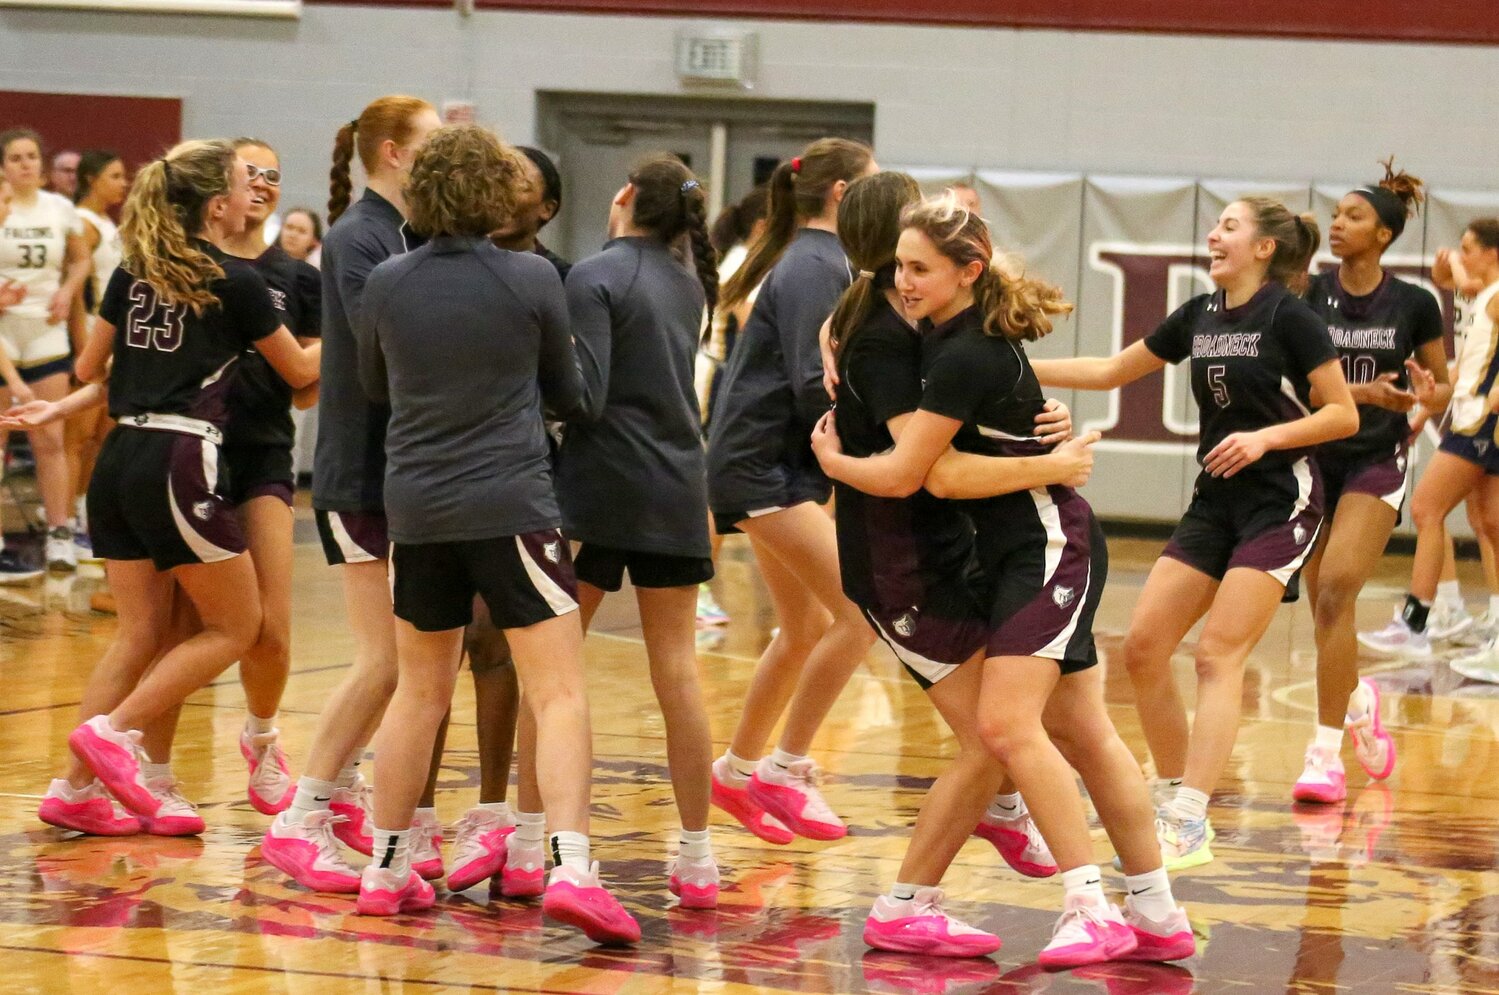 Broadneck celebrated remaining unbeaten in county play and completing a regular season sweep of Severna Park.